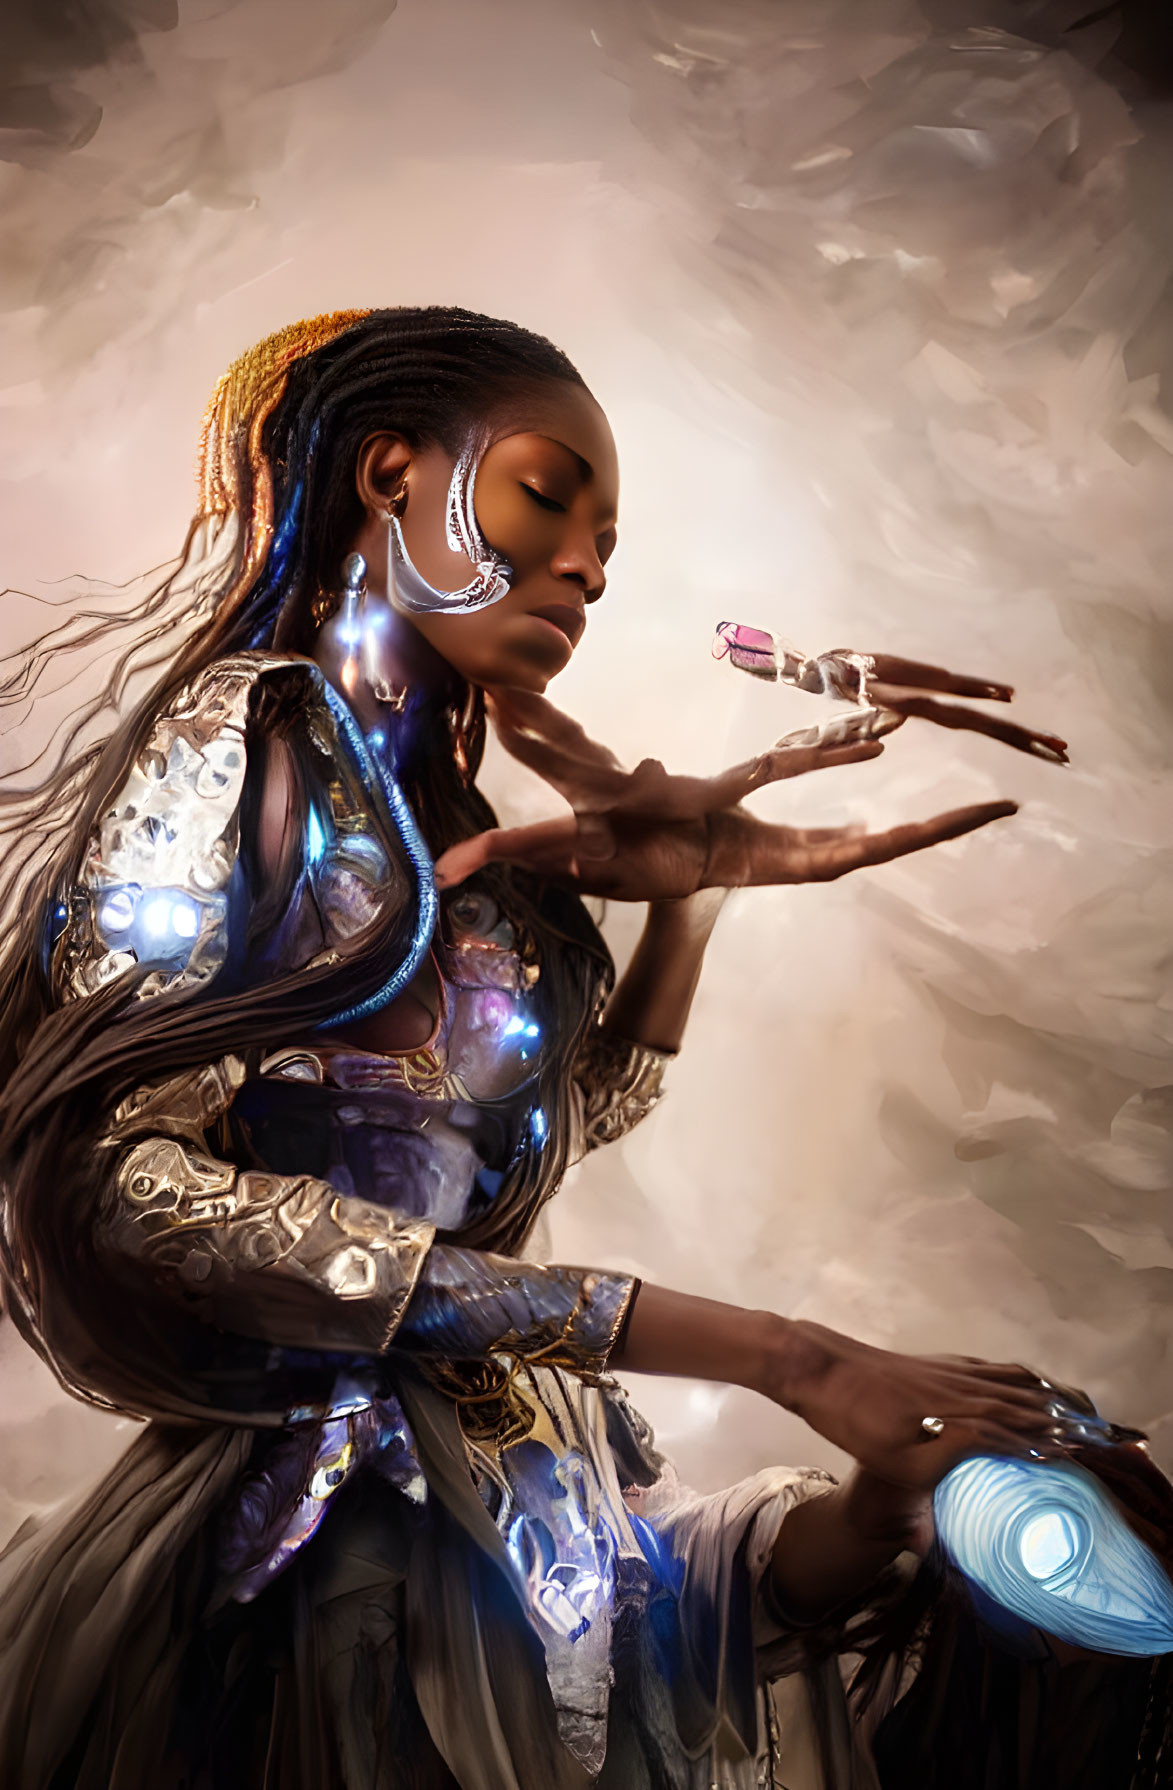 Futuristic woman with cybernetic enhancements and glowing elements holding a floating crystal